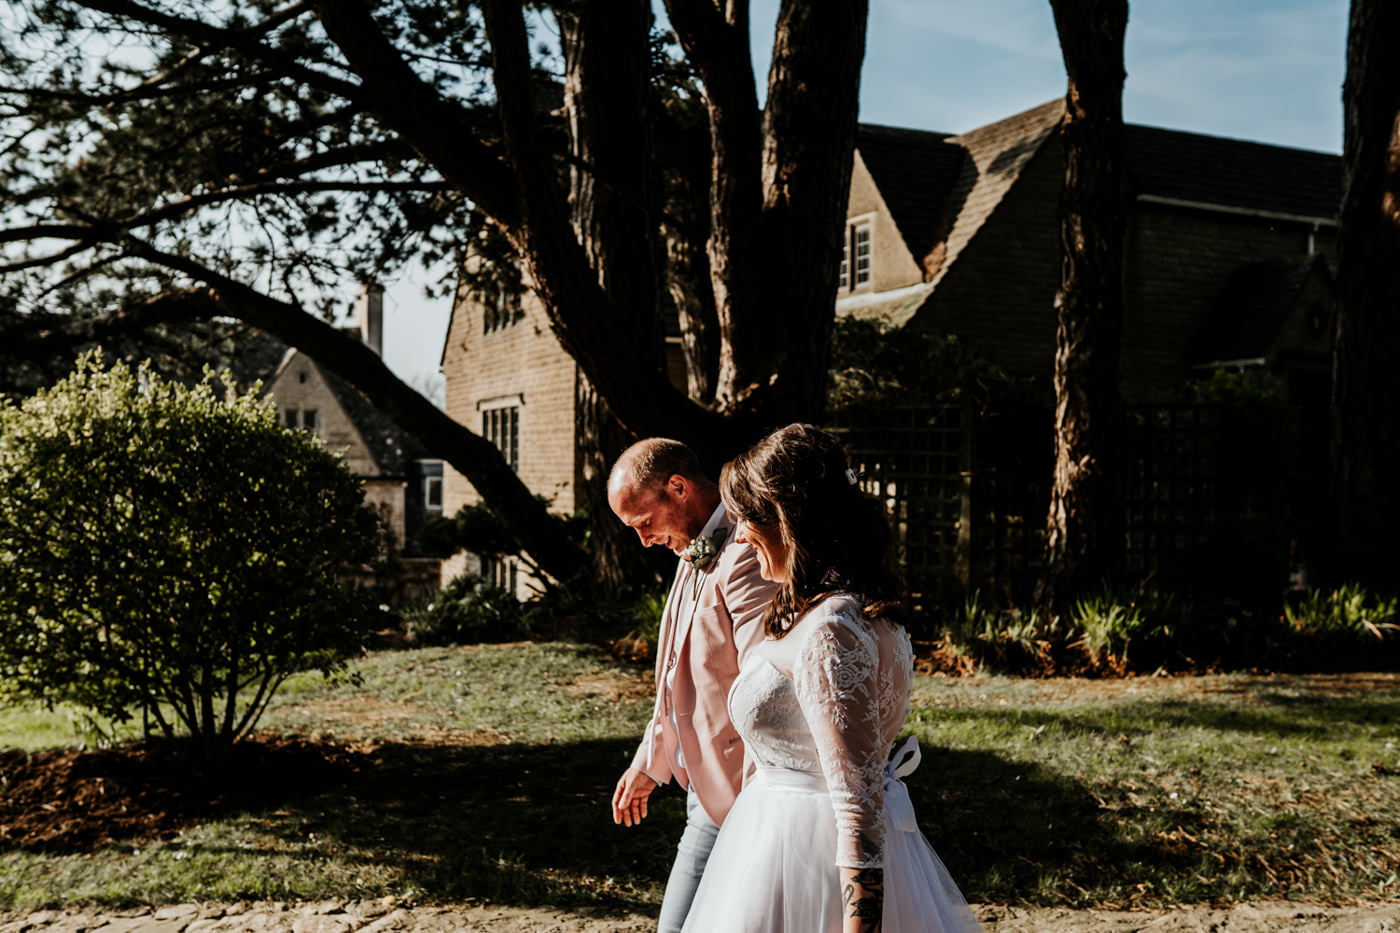 Maisie and Jack, Hatton Court, Gloucestershire 13